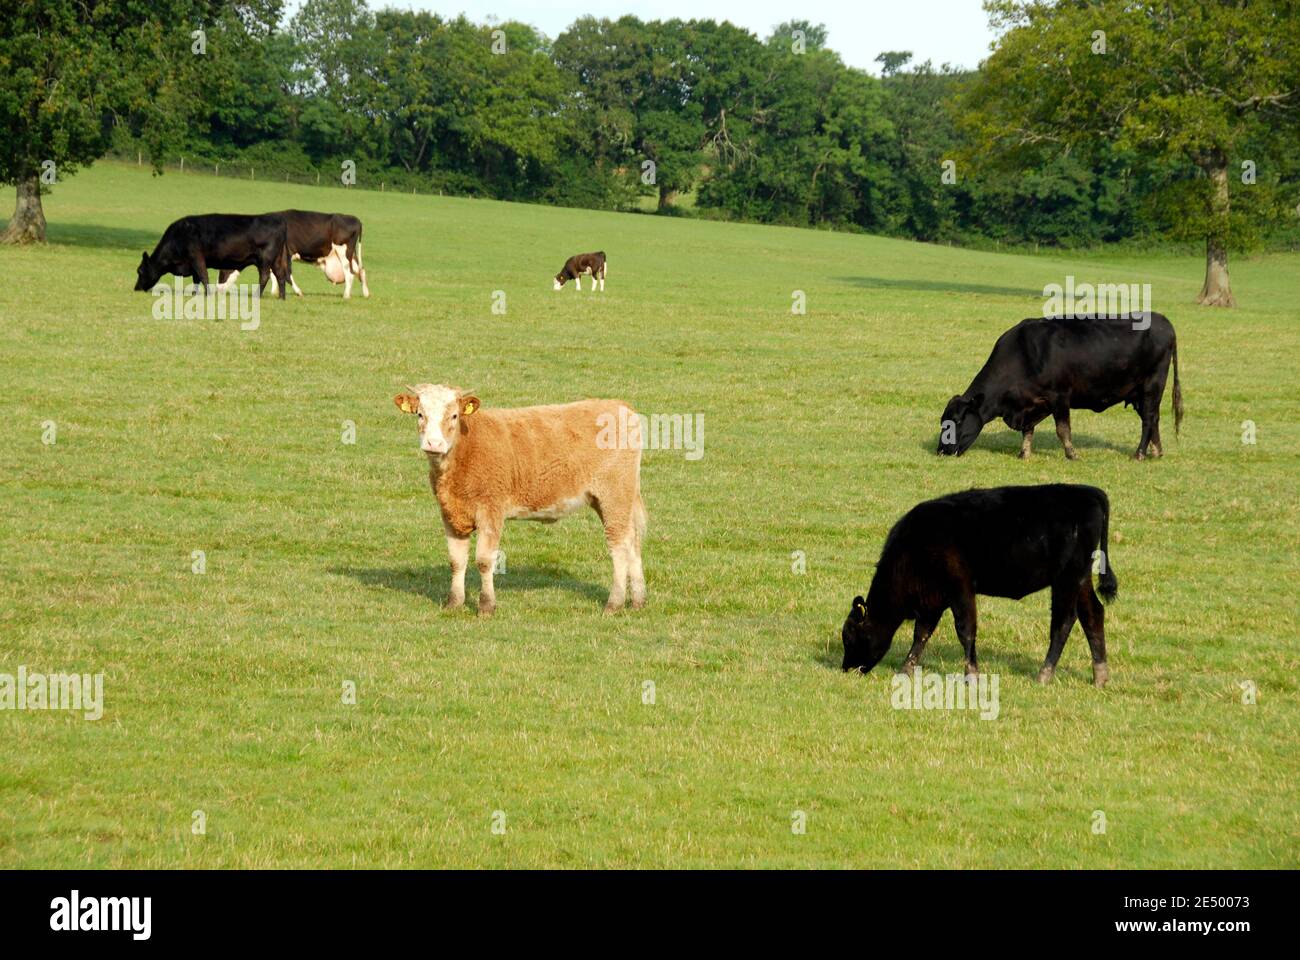 Cows grazing in a field, England Stock Photo